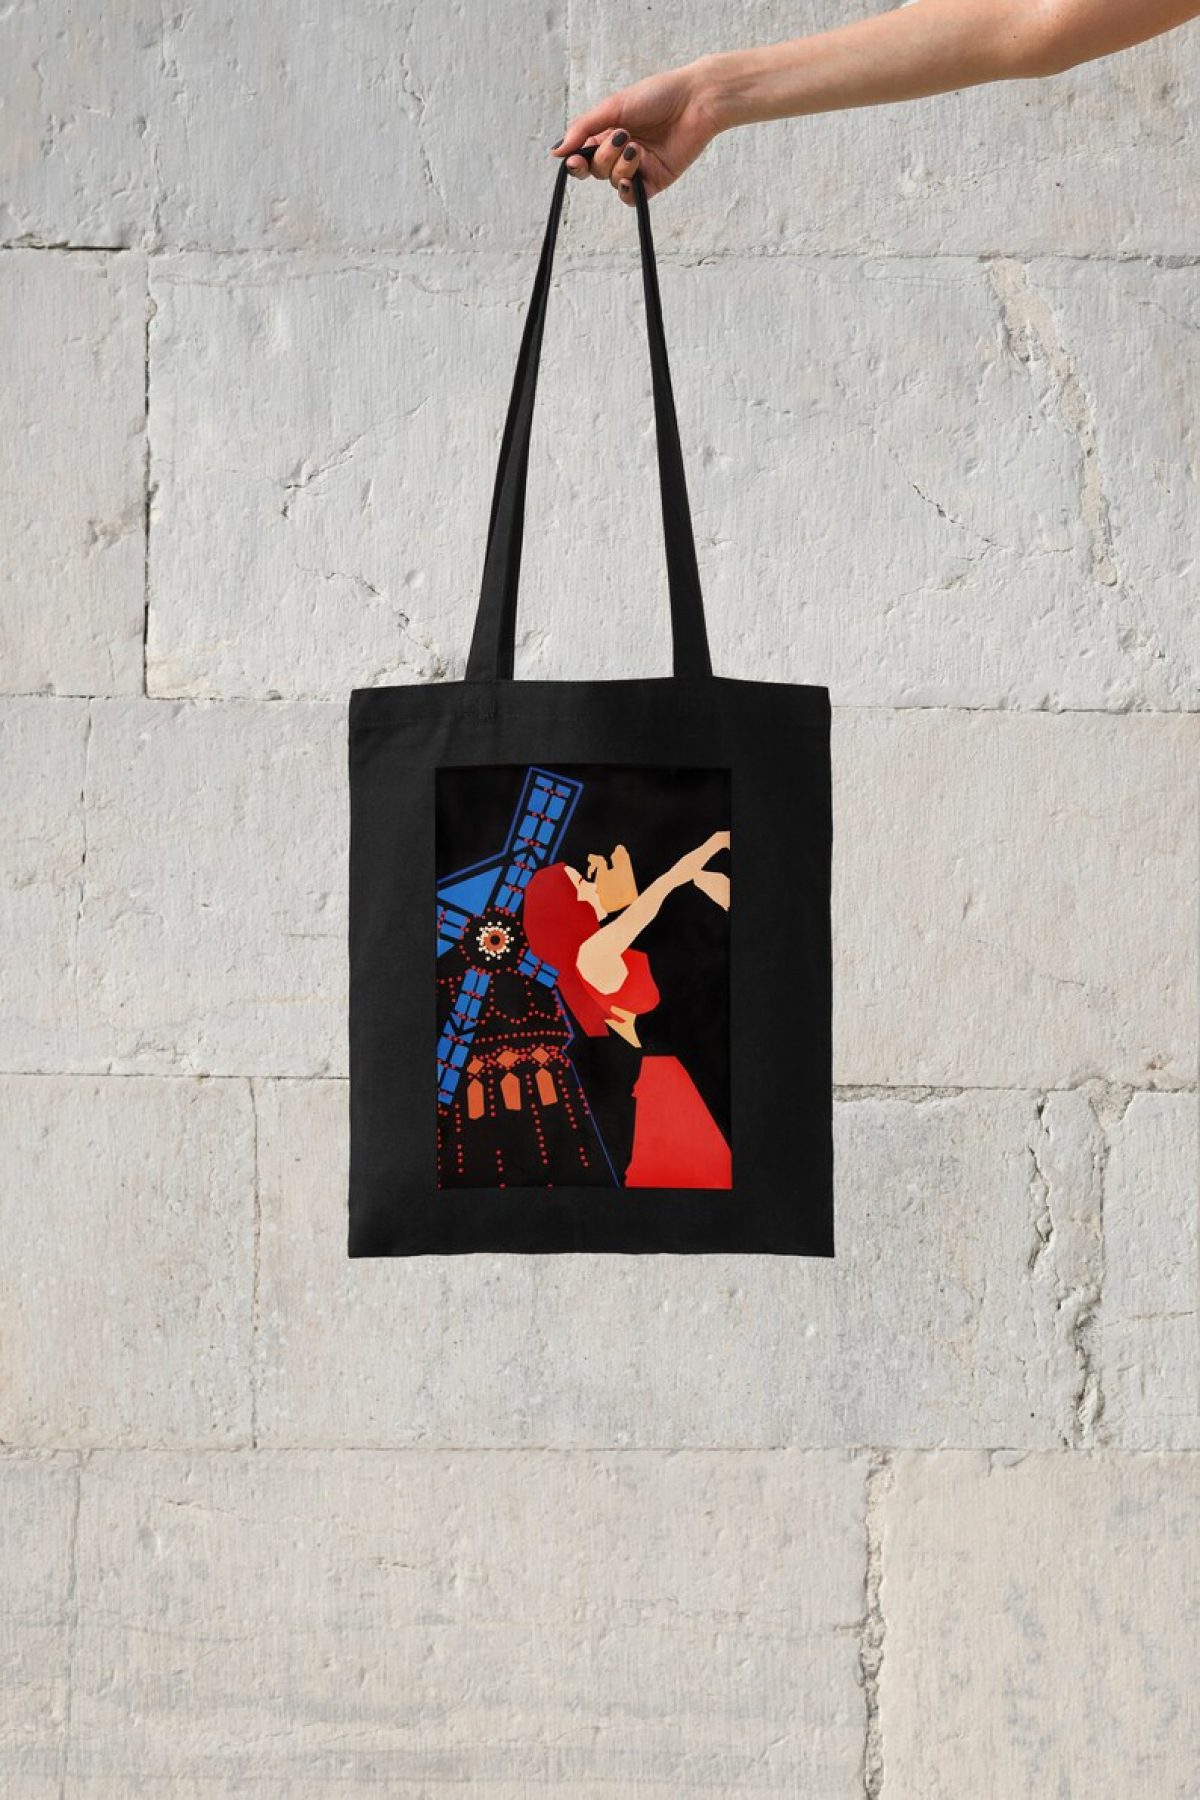 moulin rouge musical black tote bag west end theatre gift halloween 1 2